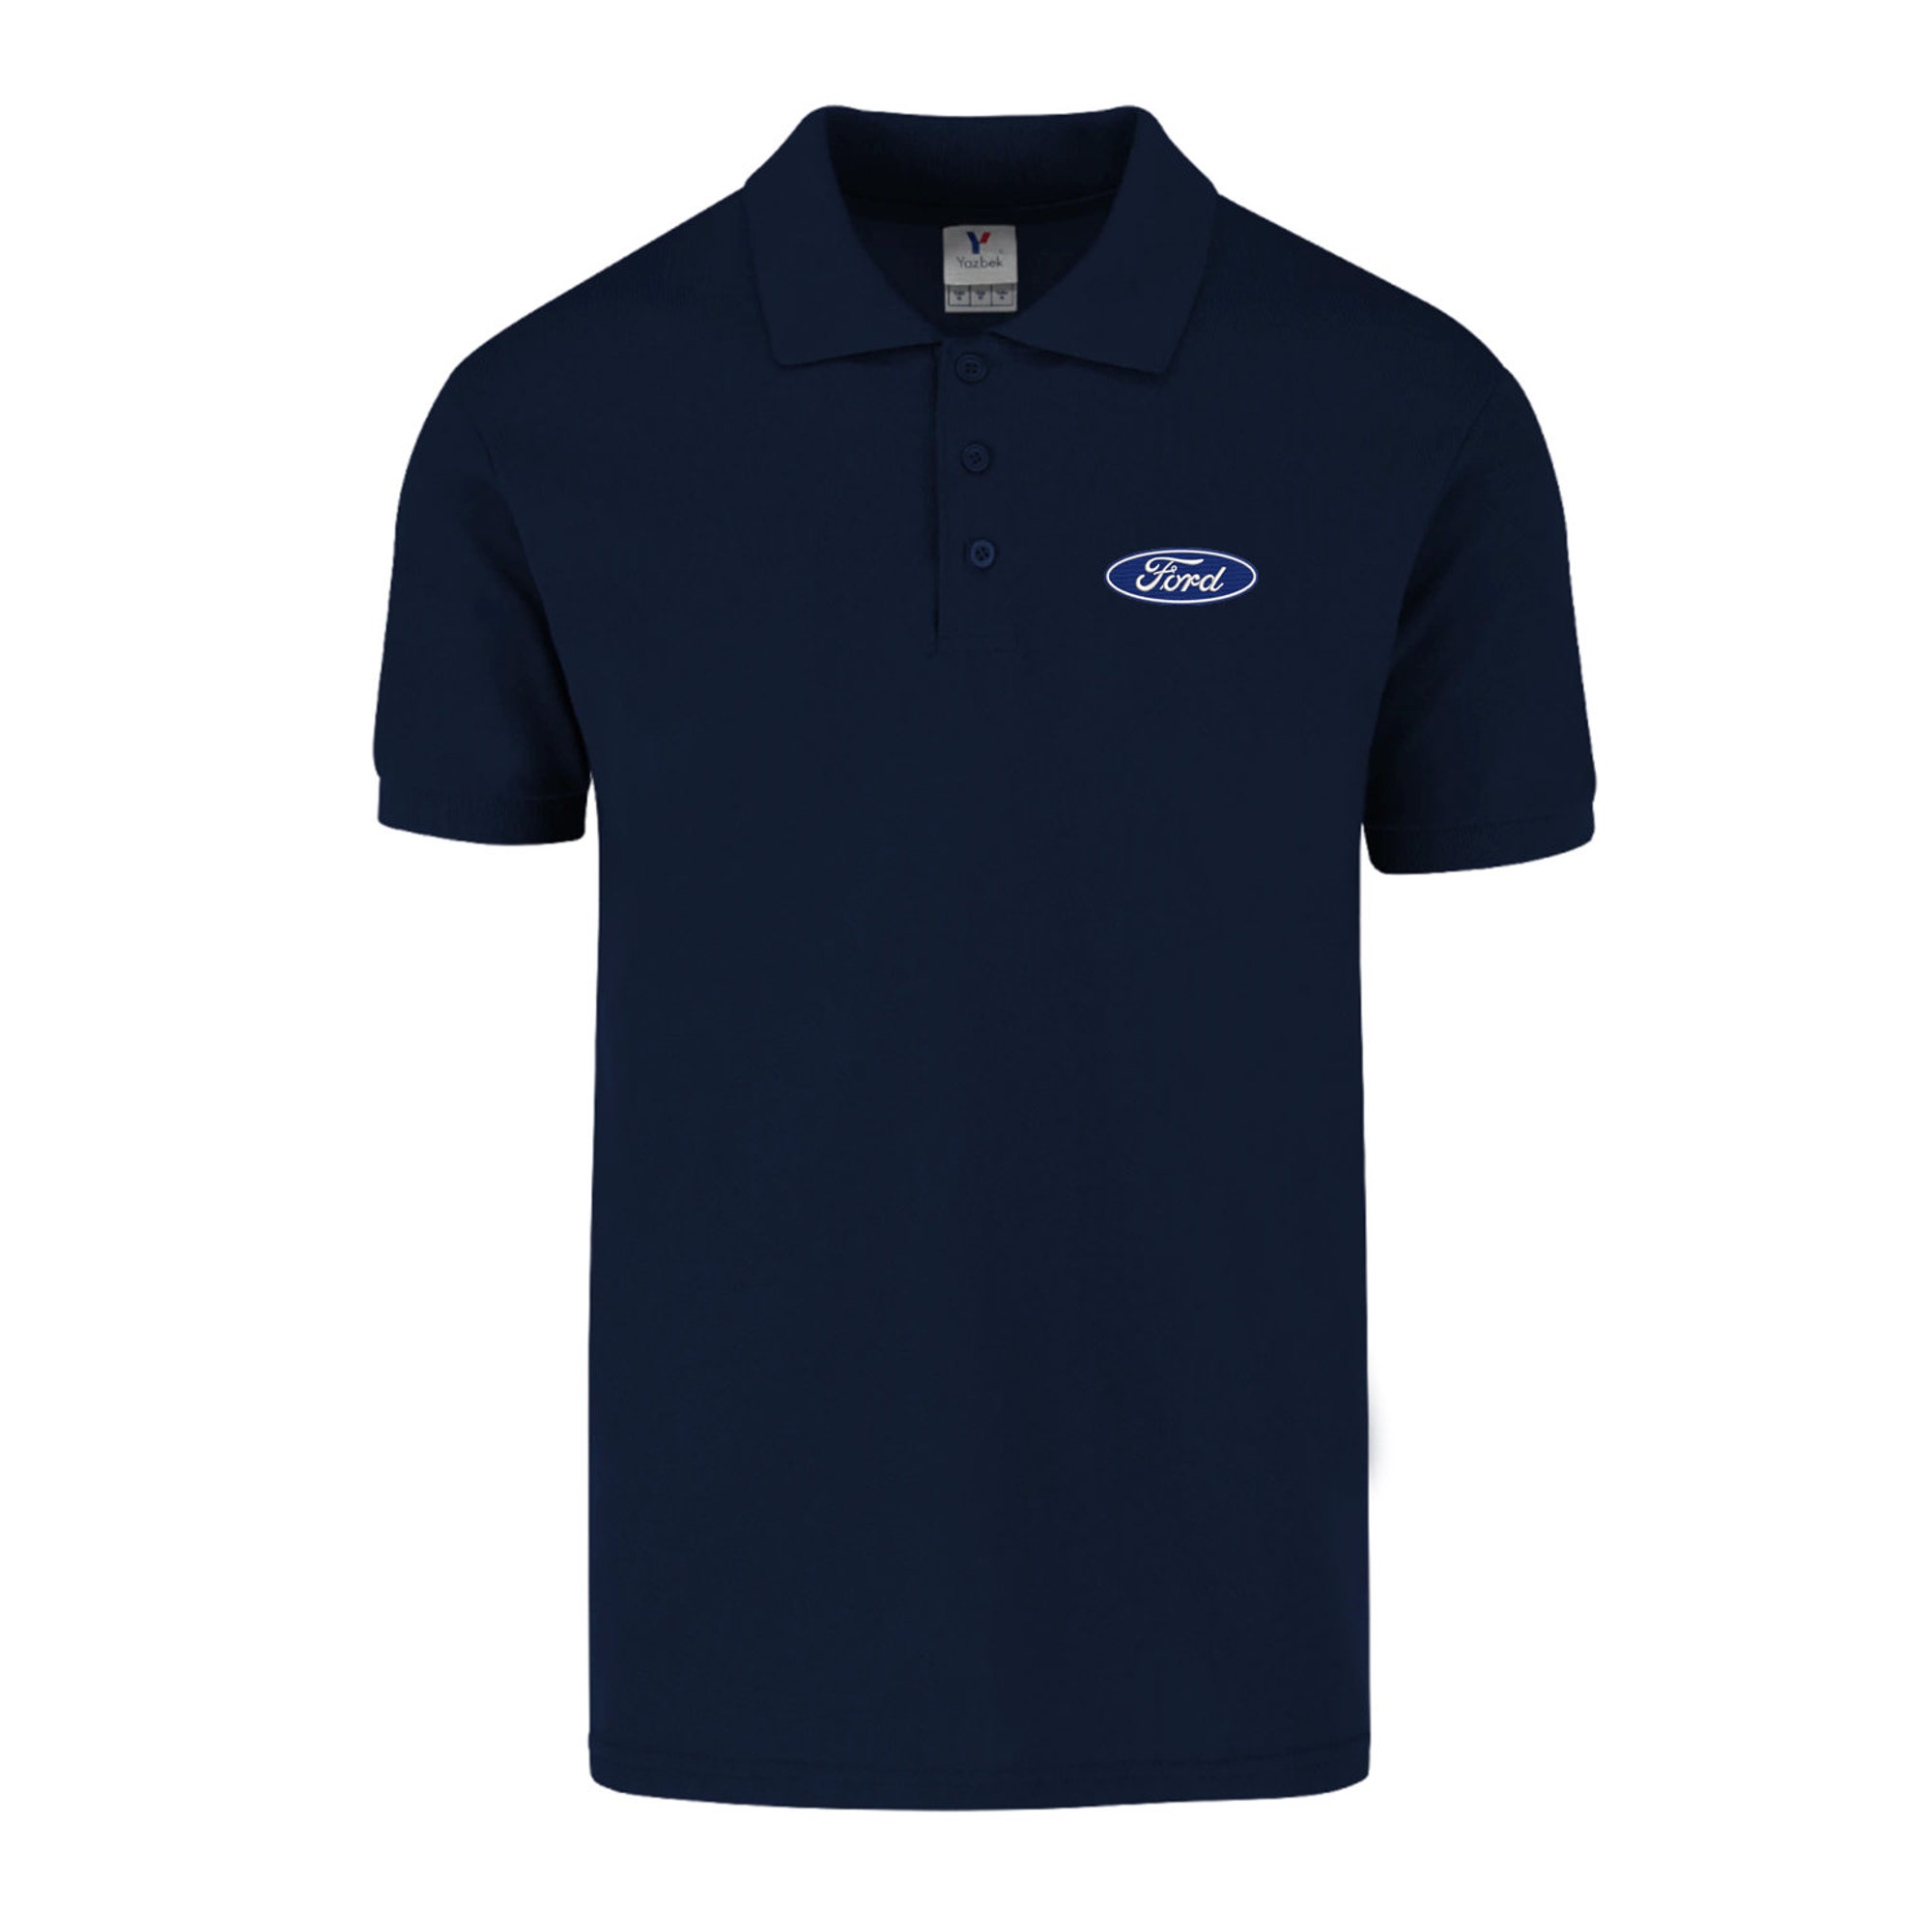 Ford Logo Polo Embroidery Shirt Men Fitted Solid Colors Cotton